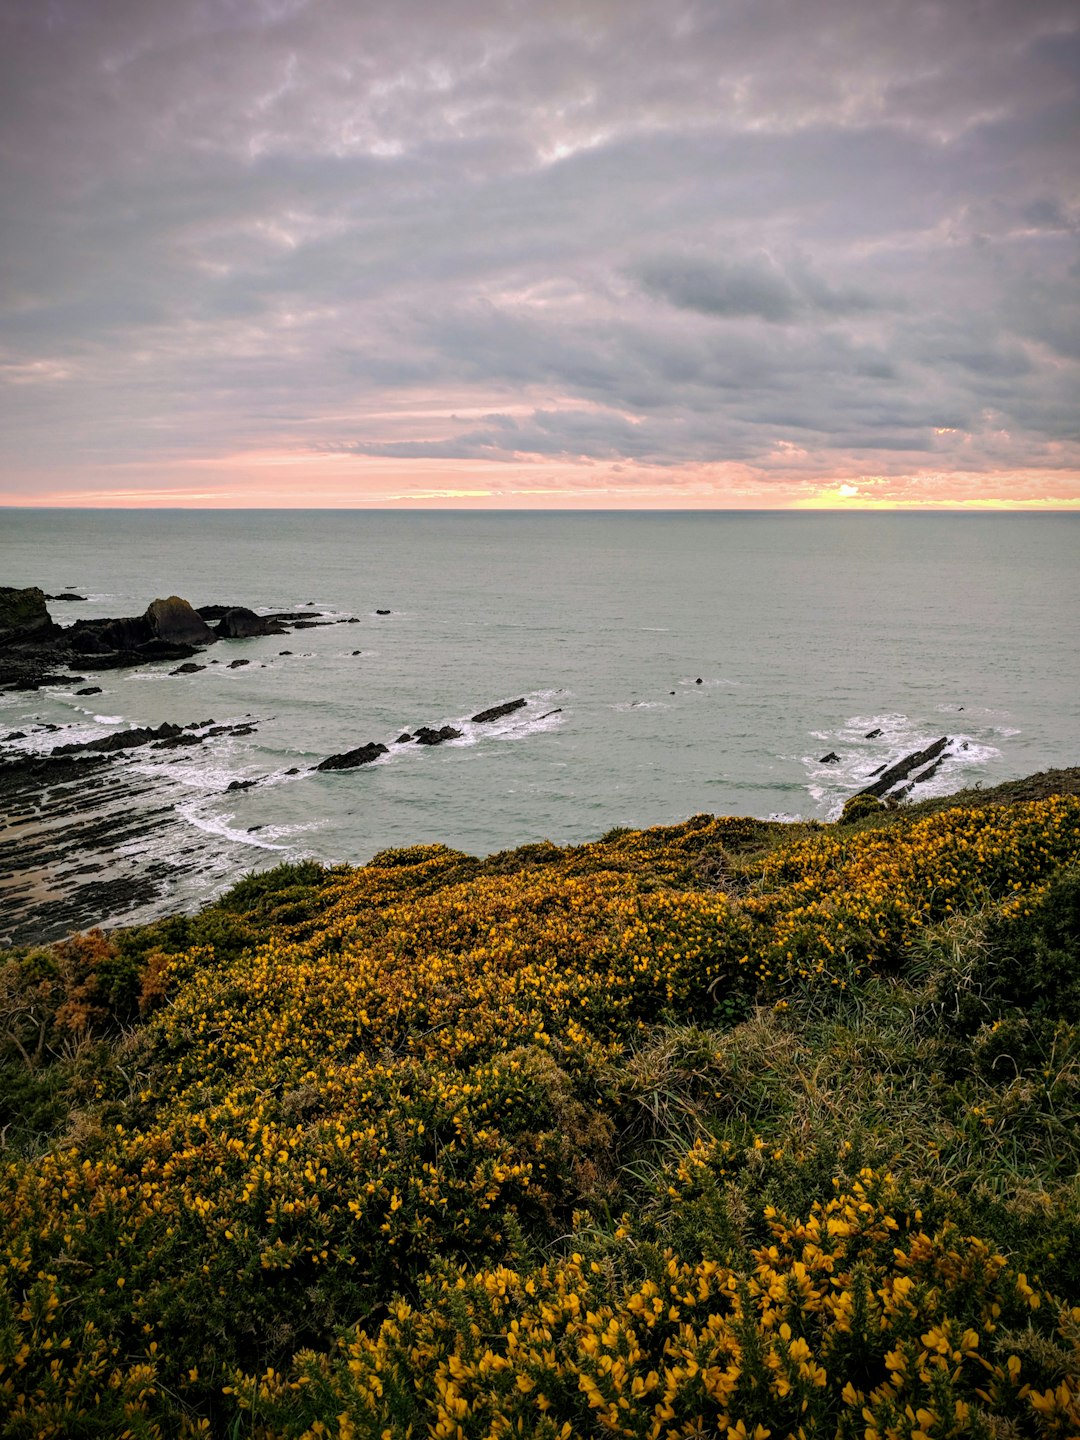 Travel Tips and Stories of Hartland in United Kingdom